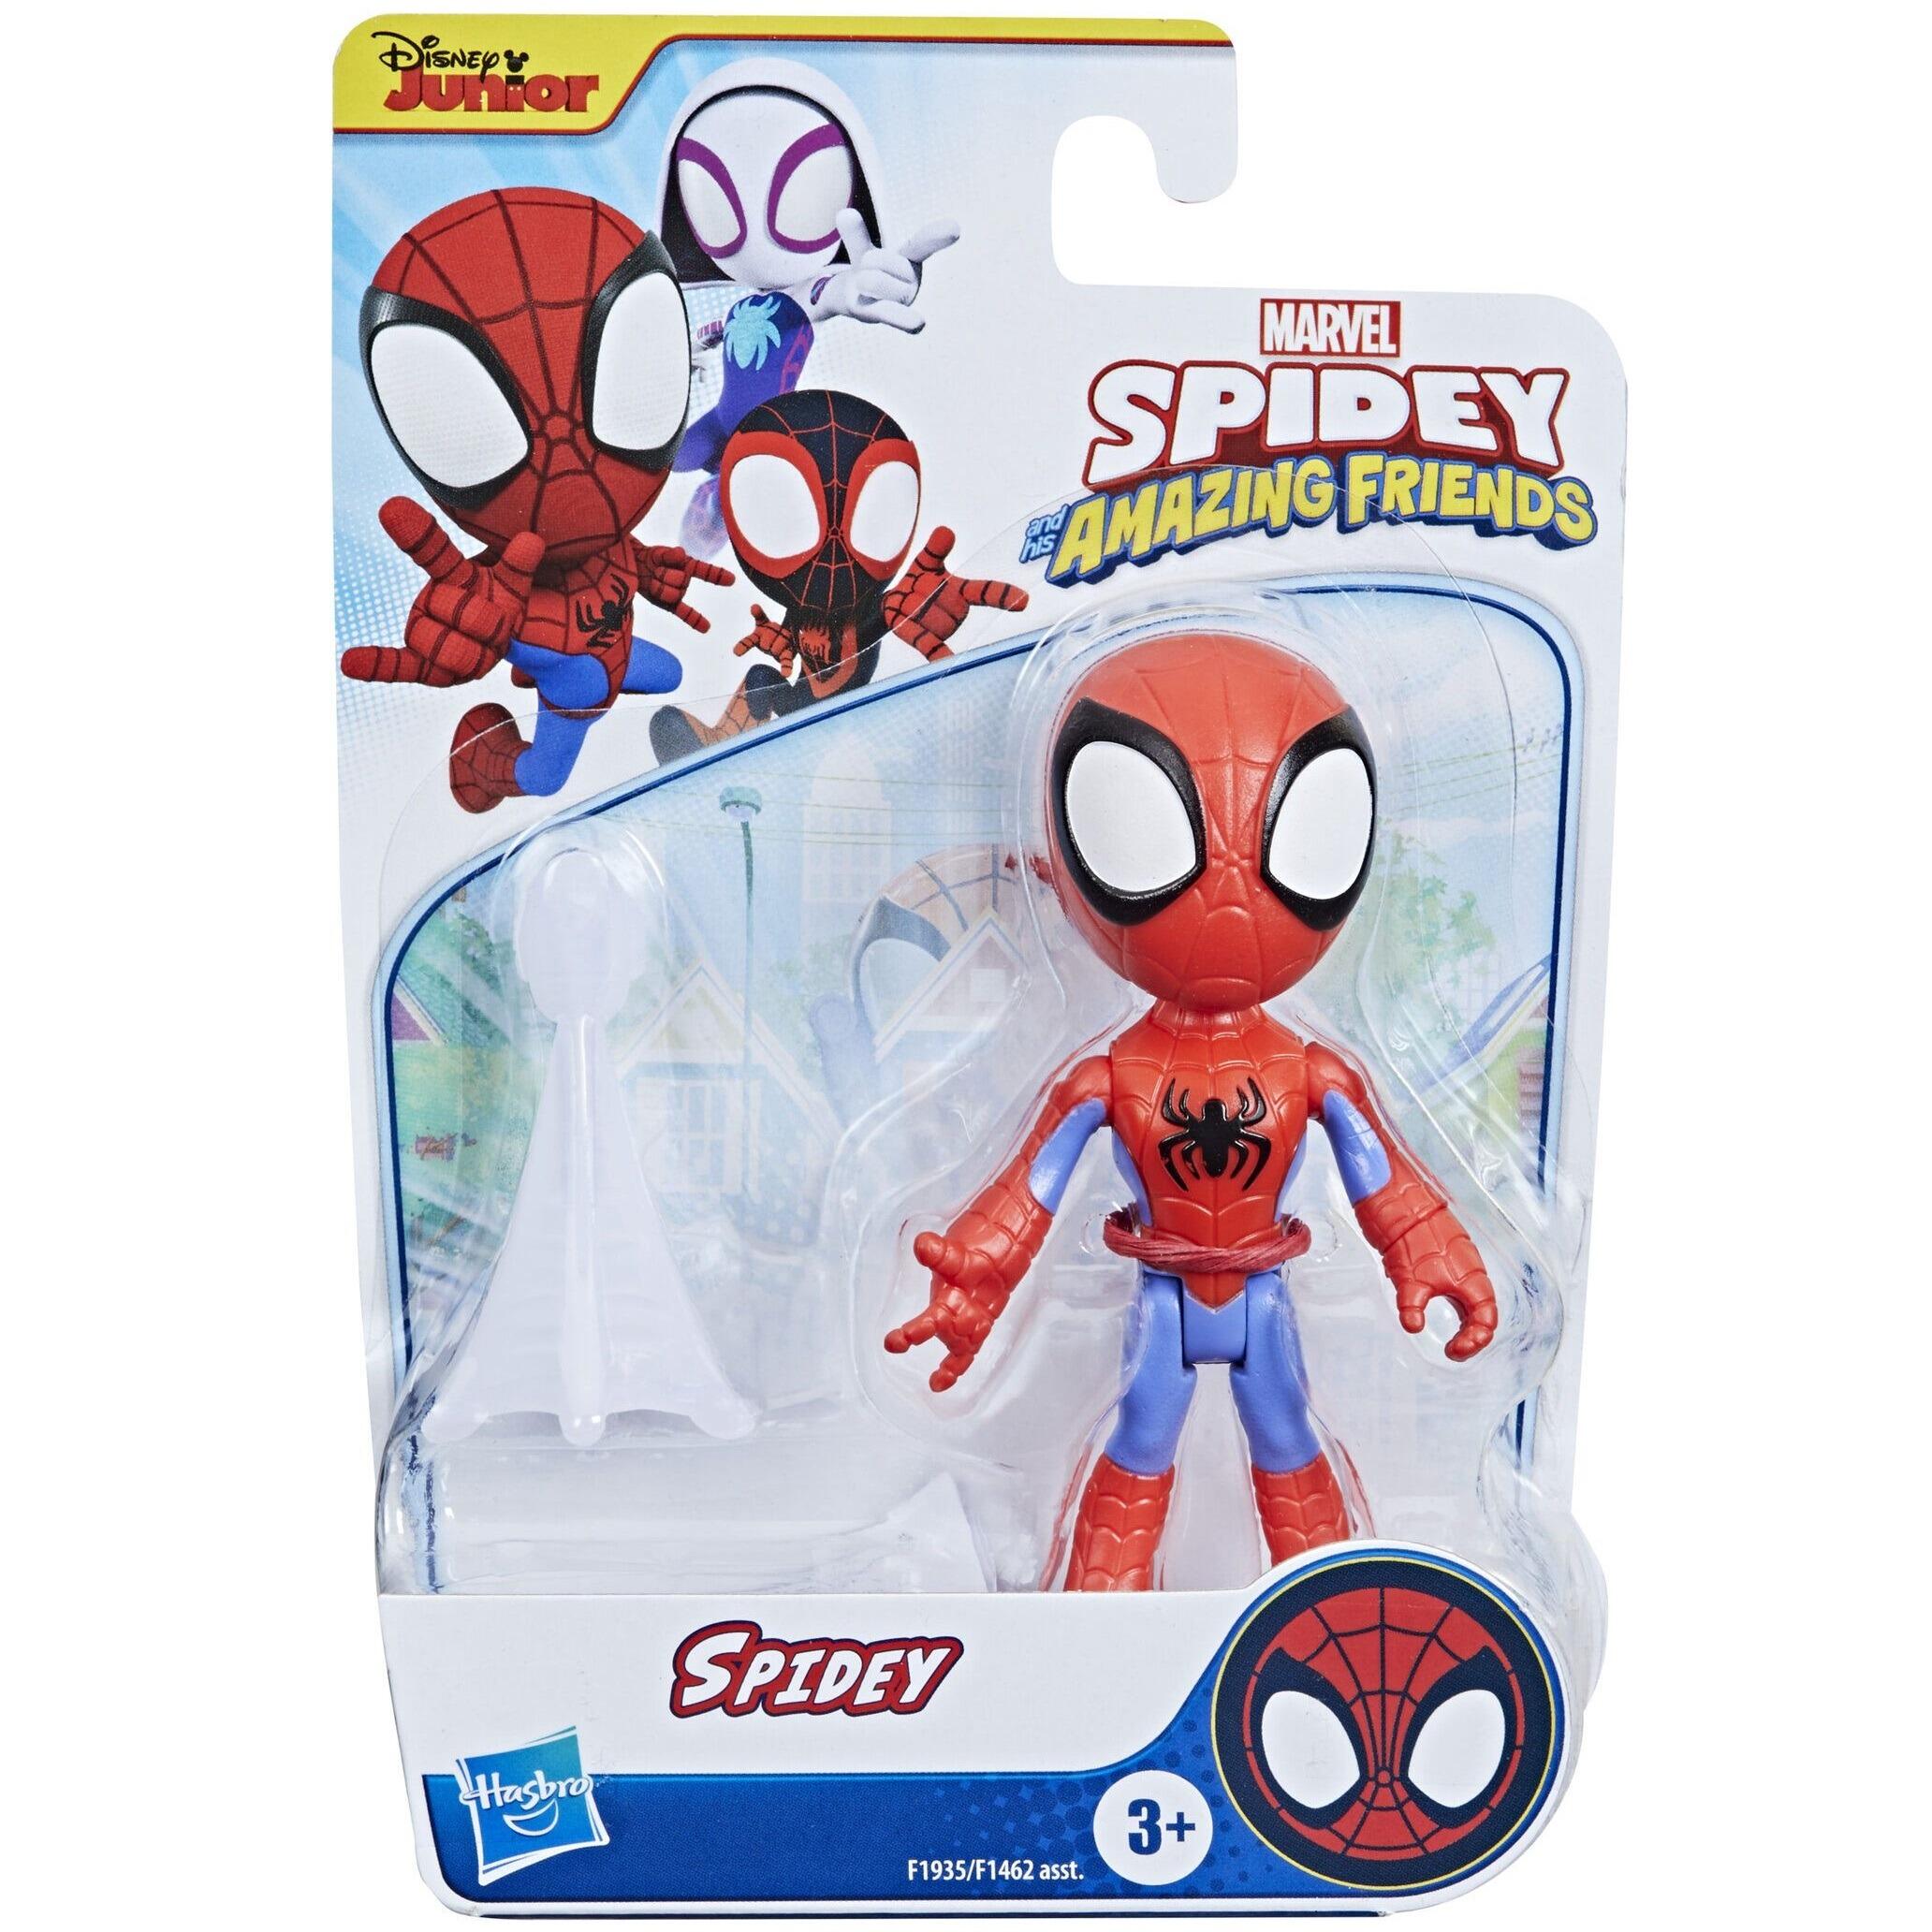 Spidey and His Amazing Friends Spider-Man Action Figure